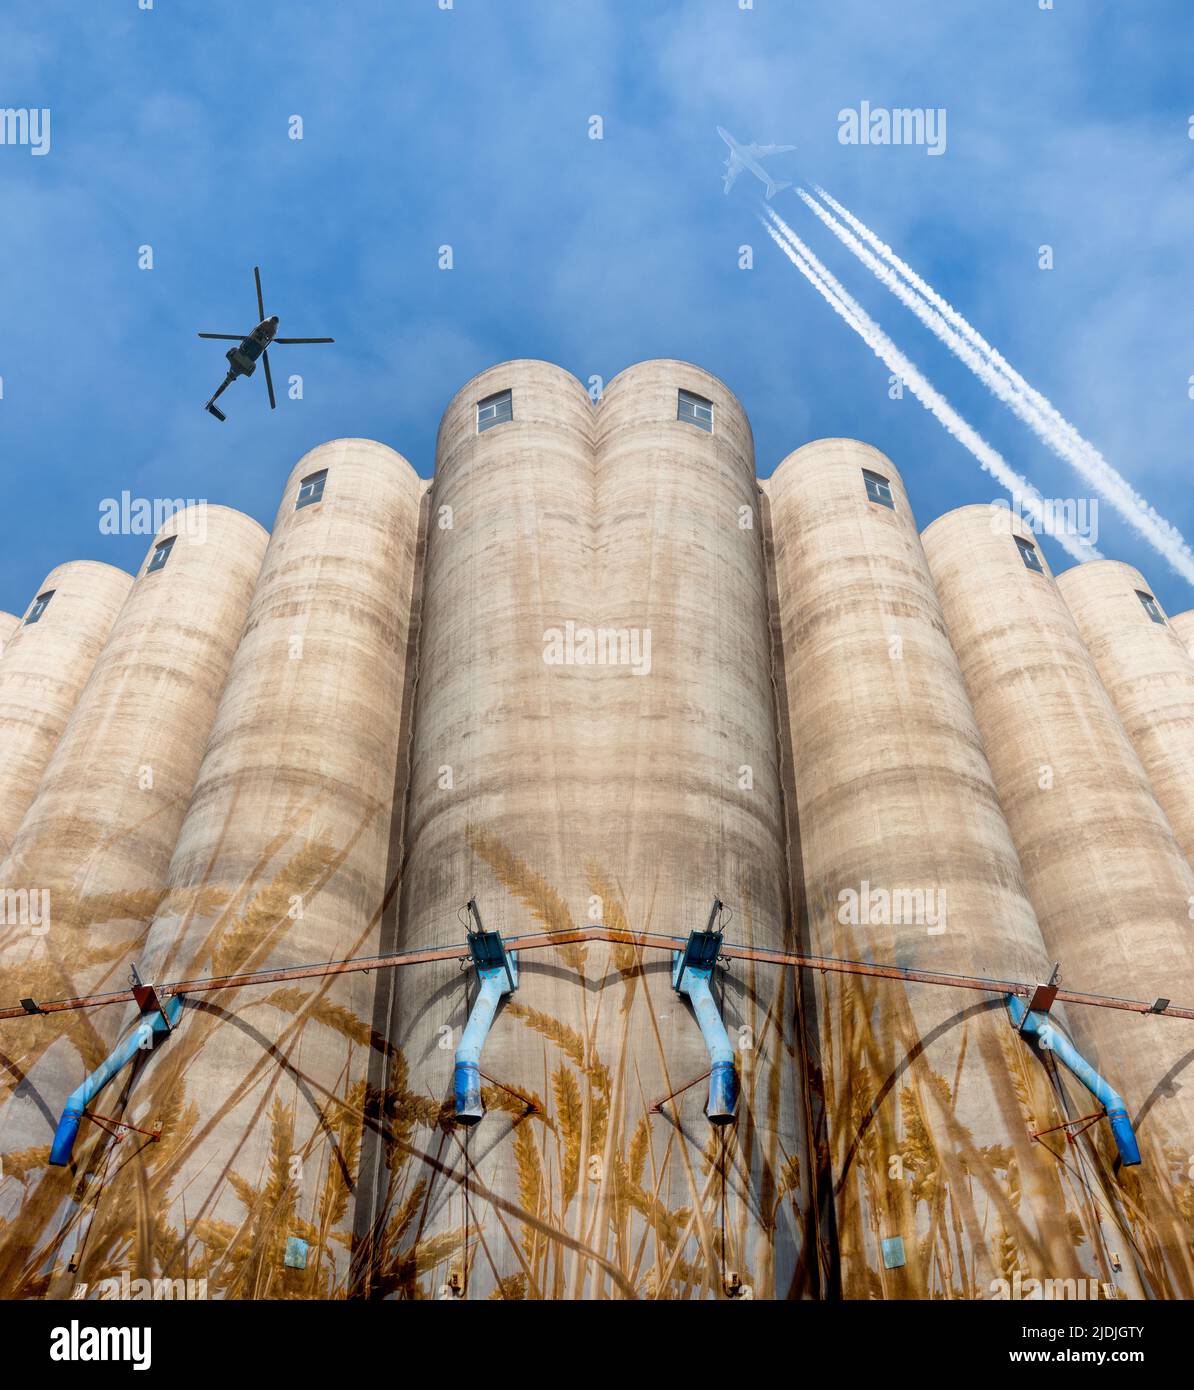 Grain silos with aircraft and helicopter flying overhead. Russia, Ukraine conflict war, wheat, food shortage, prices... concept composite image Stock Photo